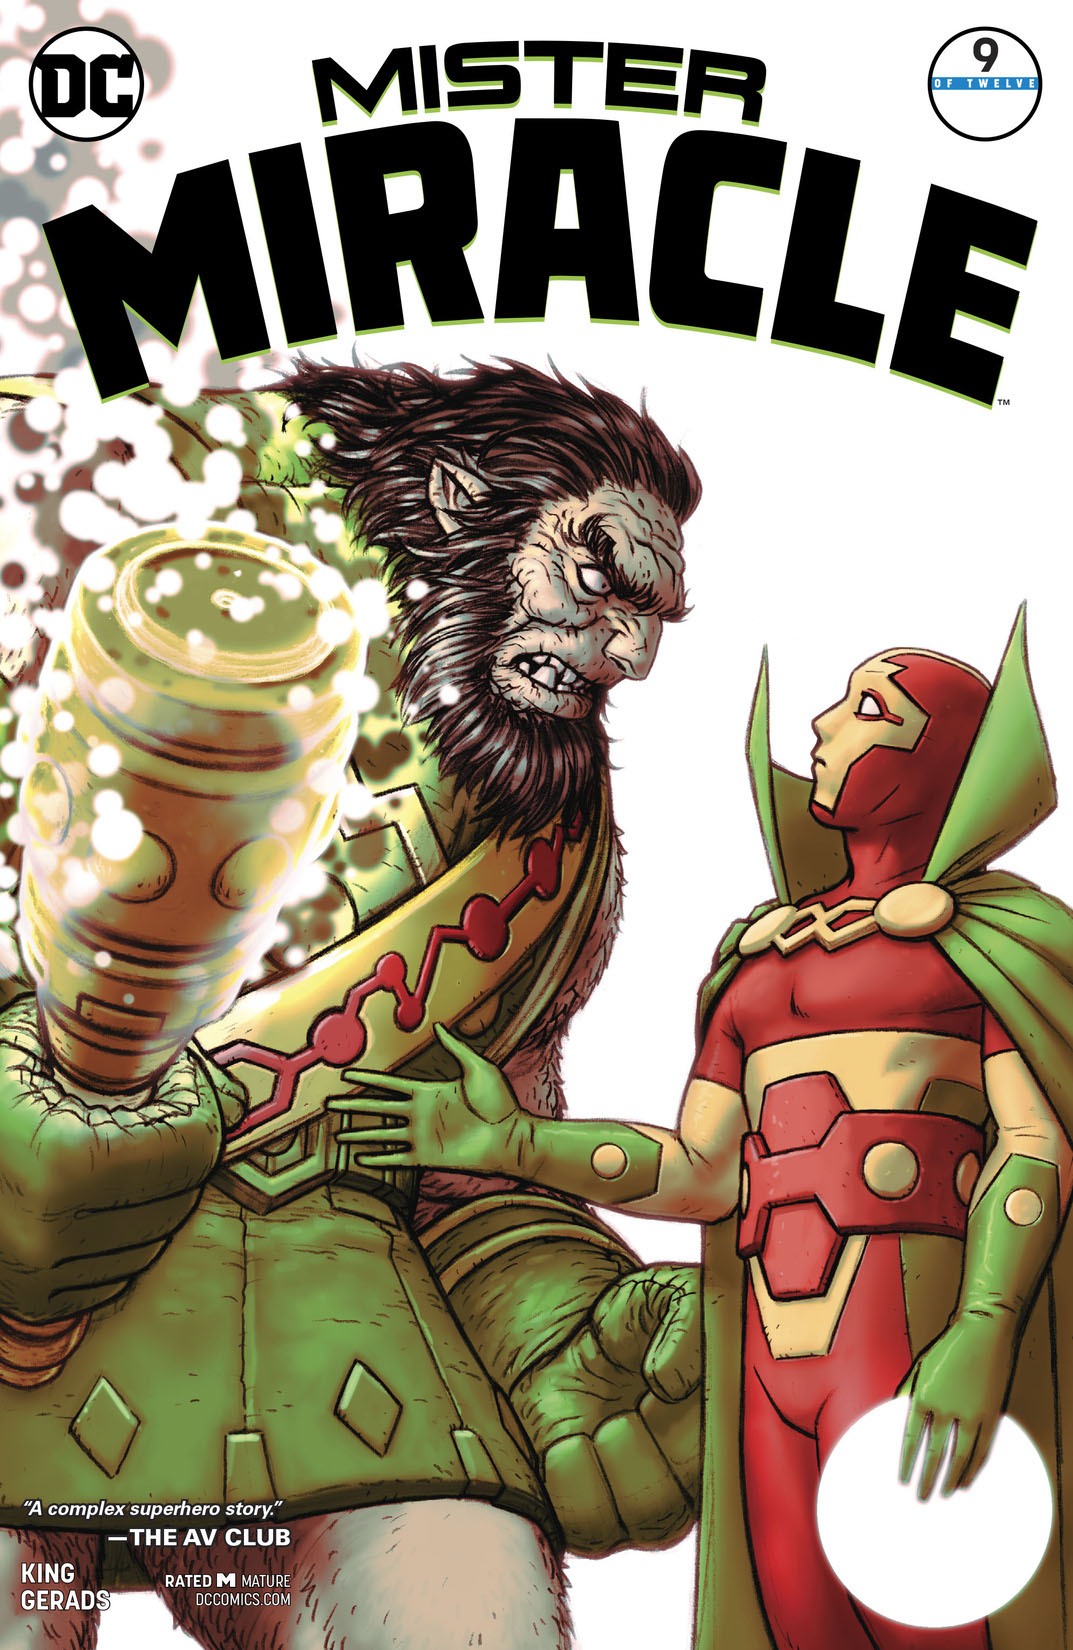 Mister Miracle (2017-) #9 preview images